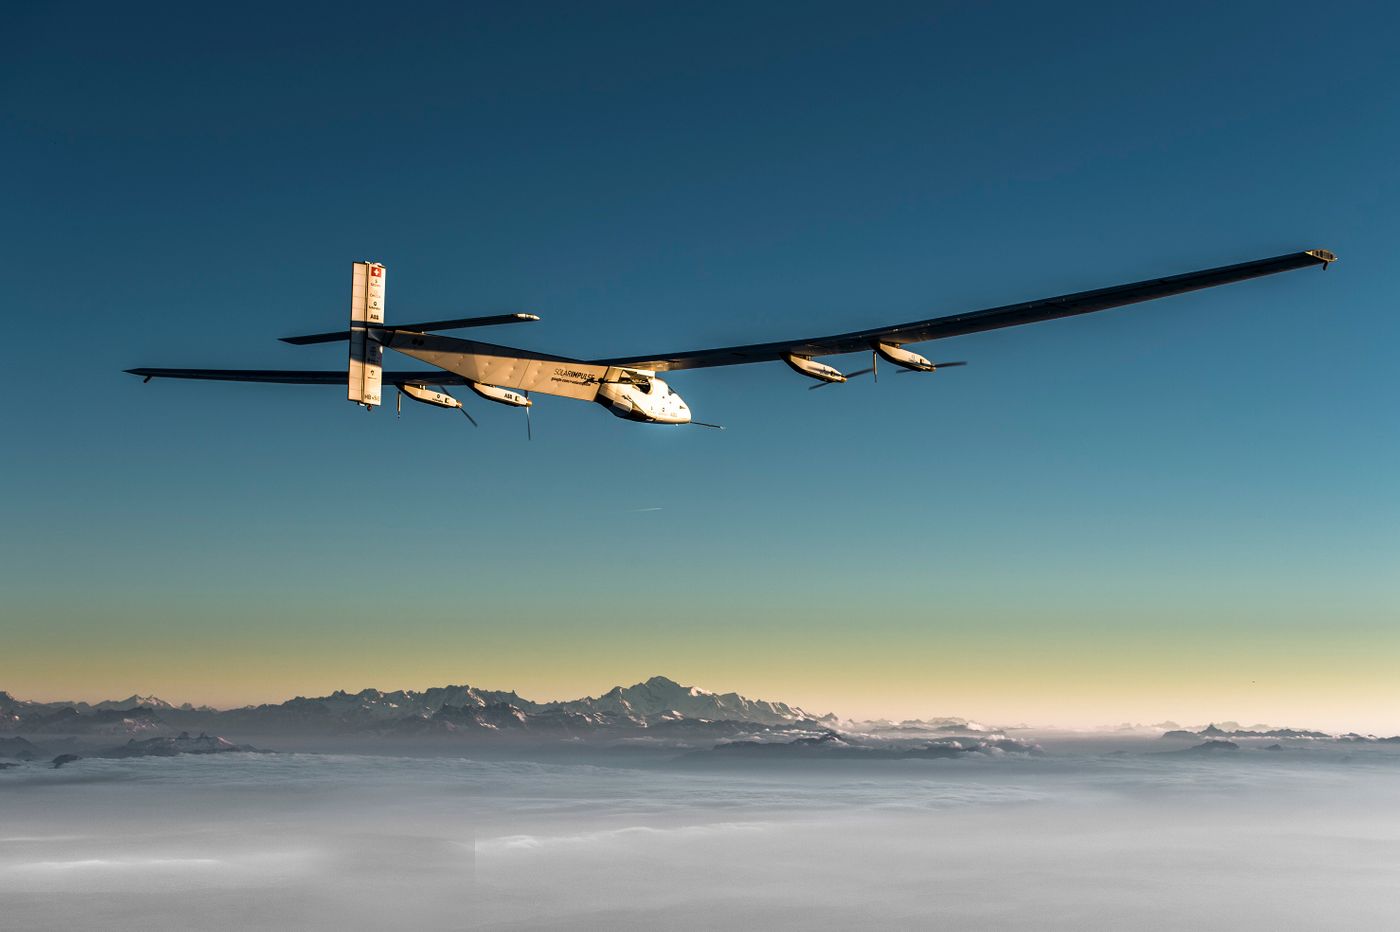 Solar Impulse is lifting off yet again for another trip.